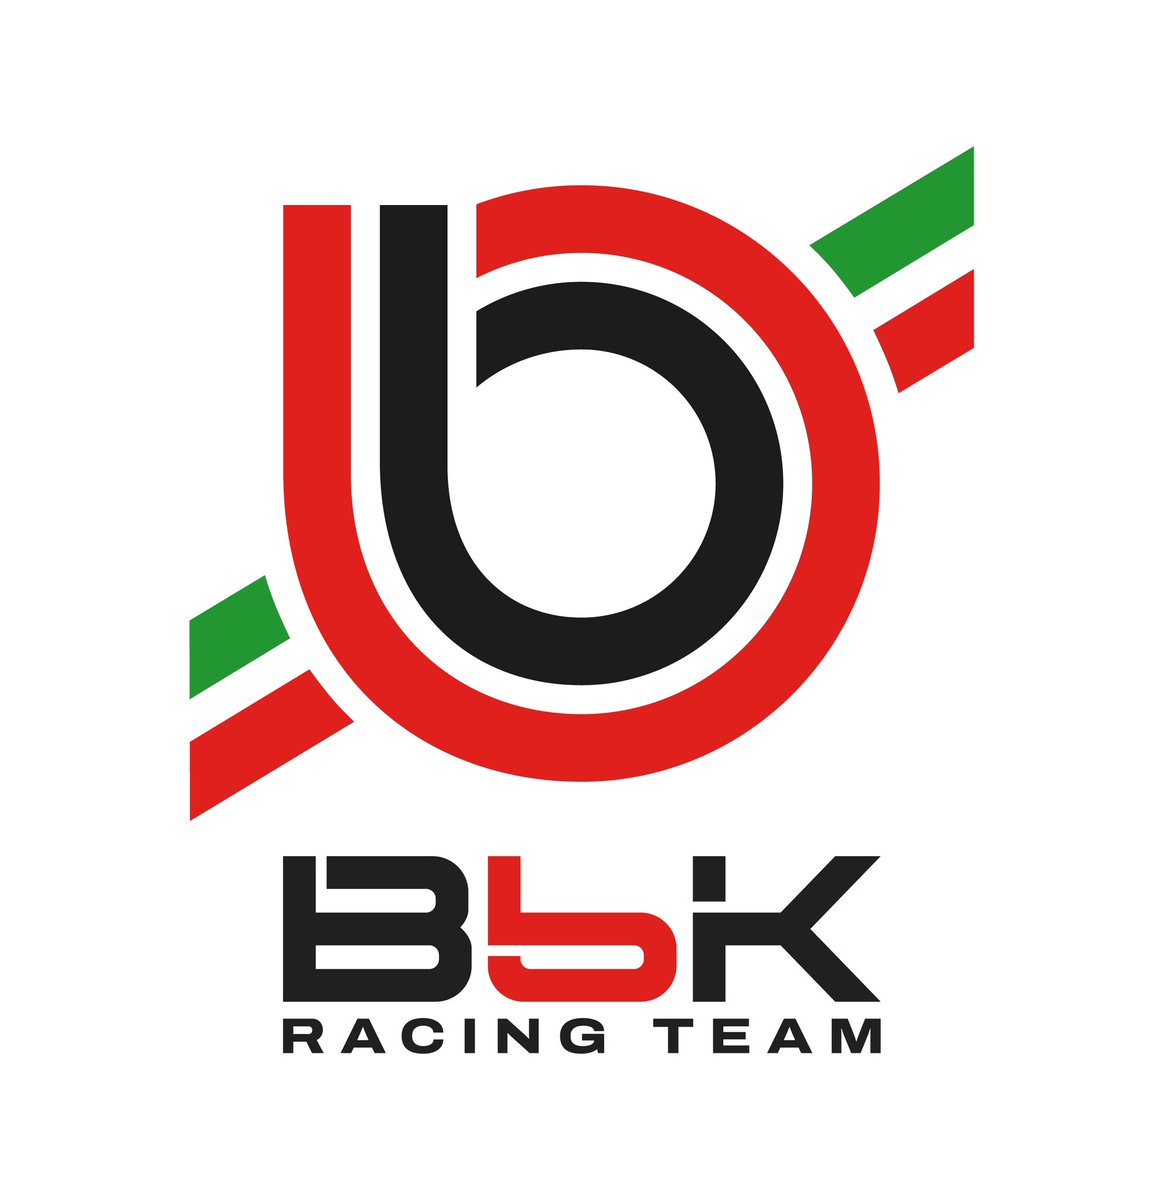 Bimota is set to return to the world racing stage in 2025 competing in the @WorldSBK Championship partnering with Kawasaki. The new team will operate under the title of the Bimota by Kawasaki Racing Team.  More info here: tinyurl.com/4dj6fhvf